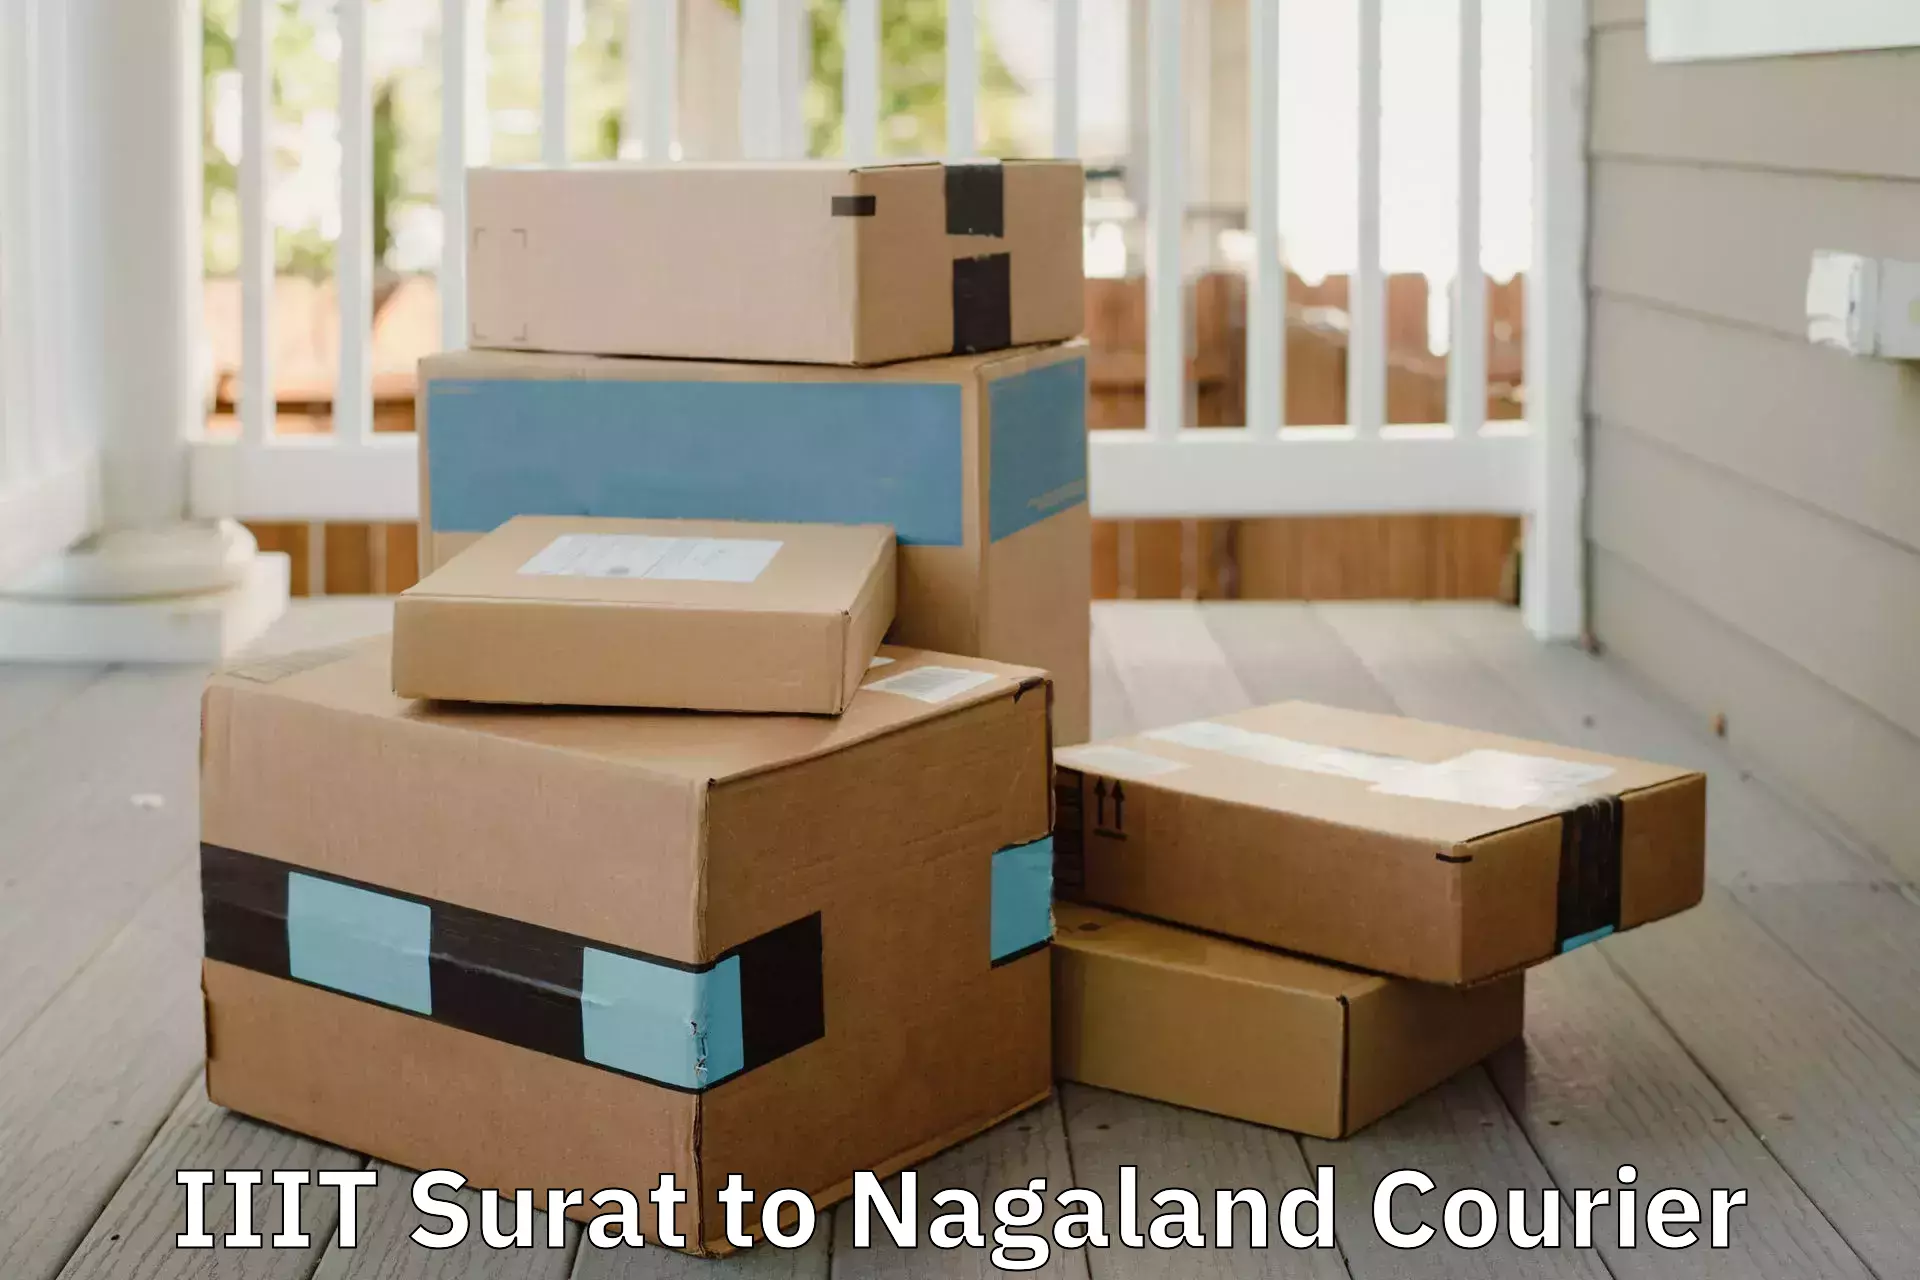 Safe household movers in IIIT Surat to Nagaland